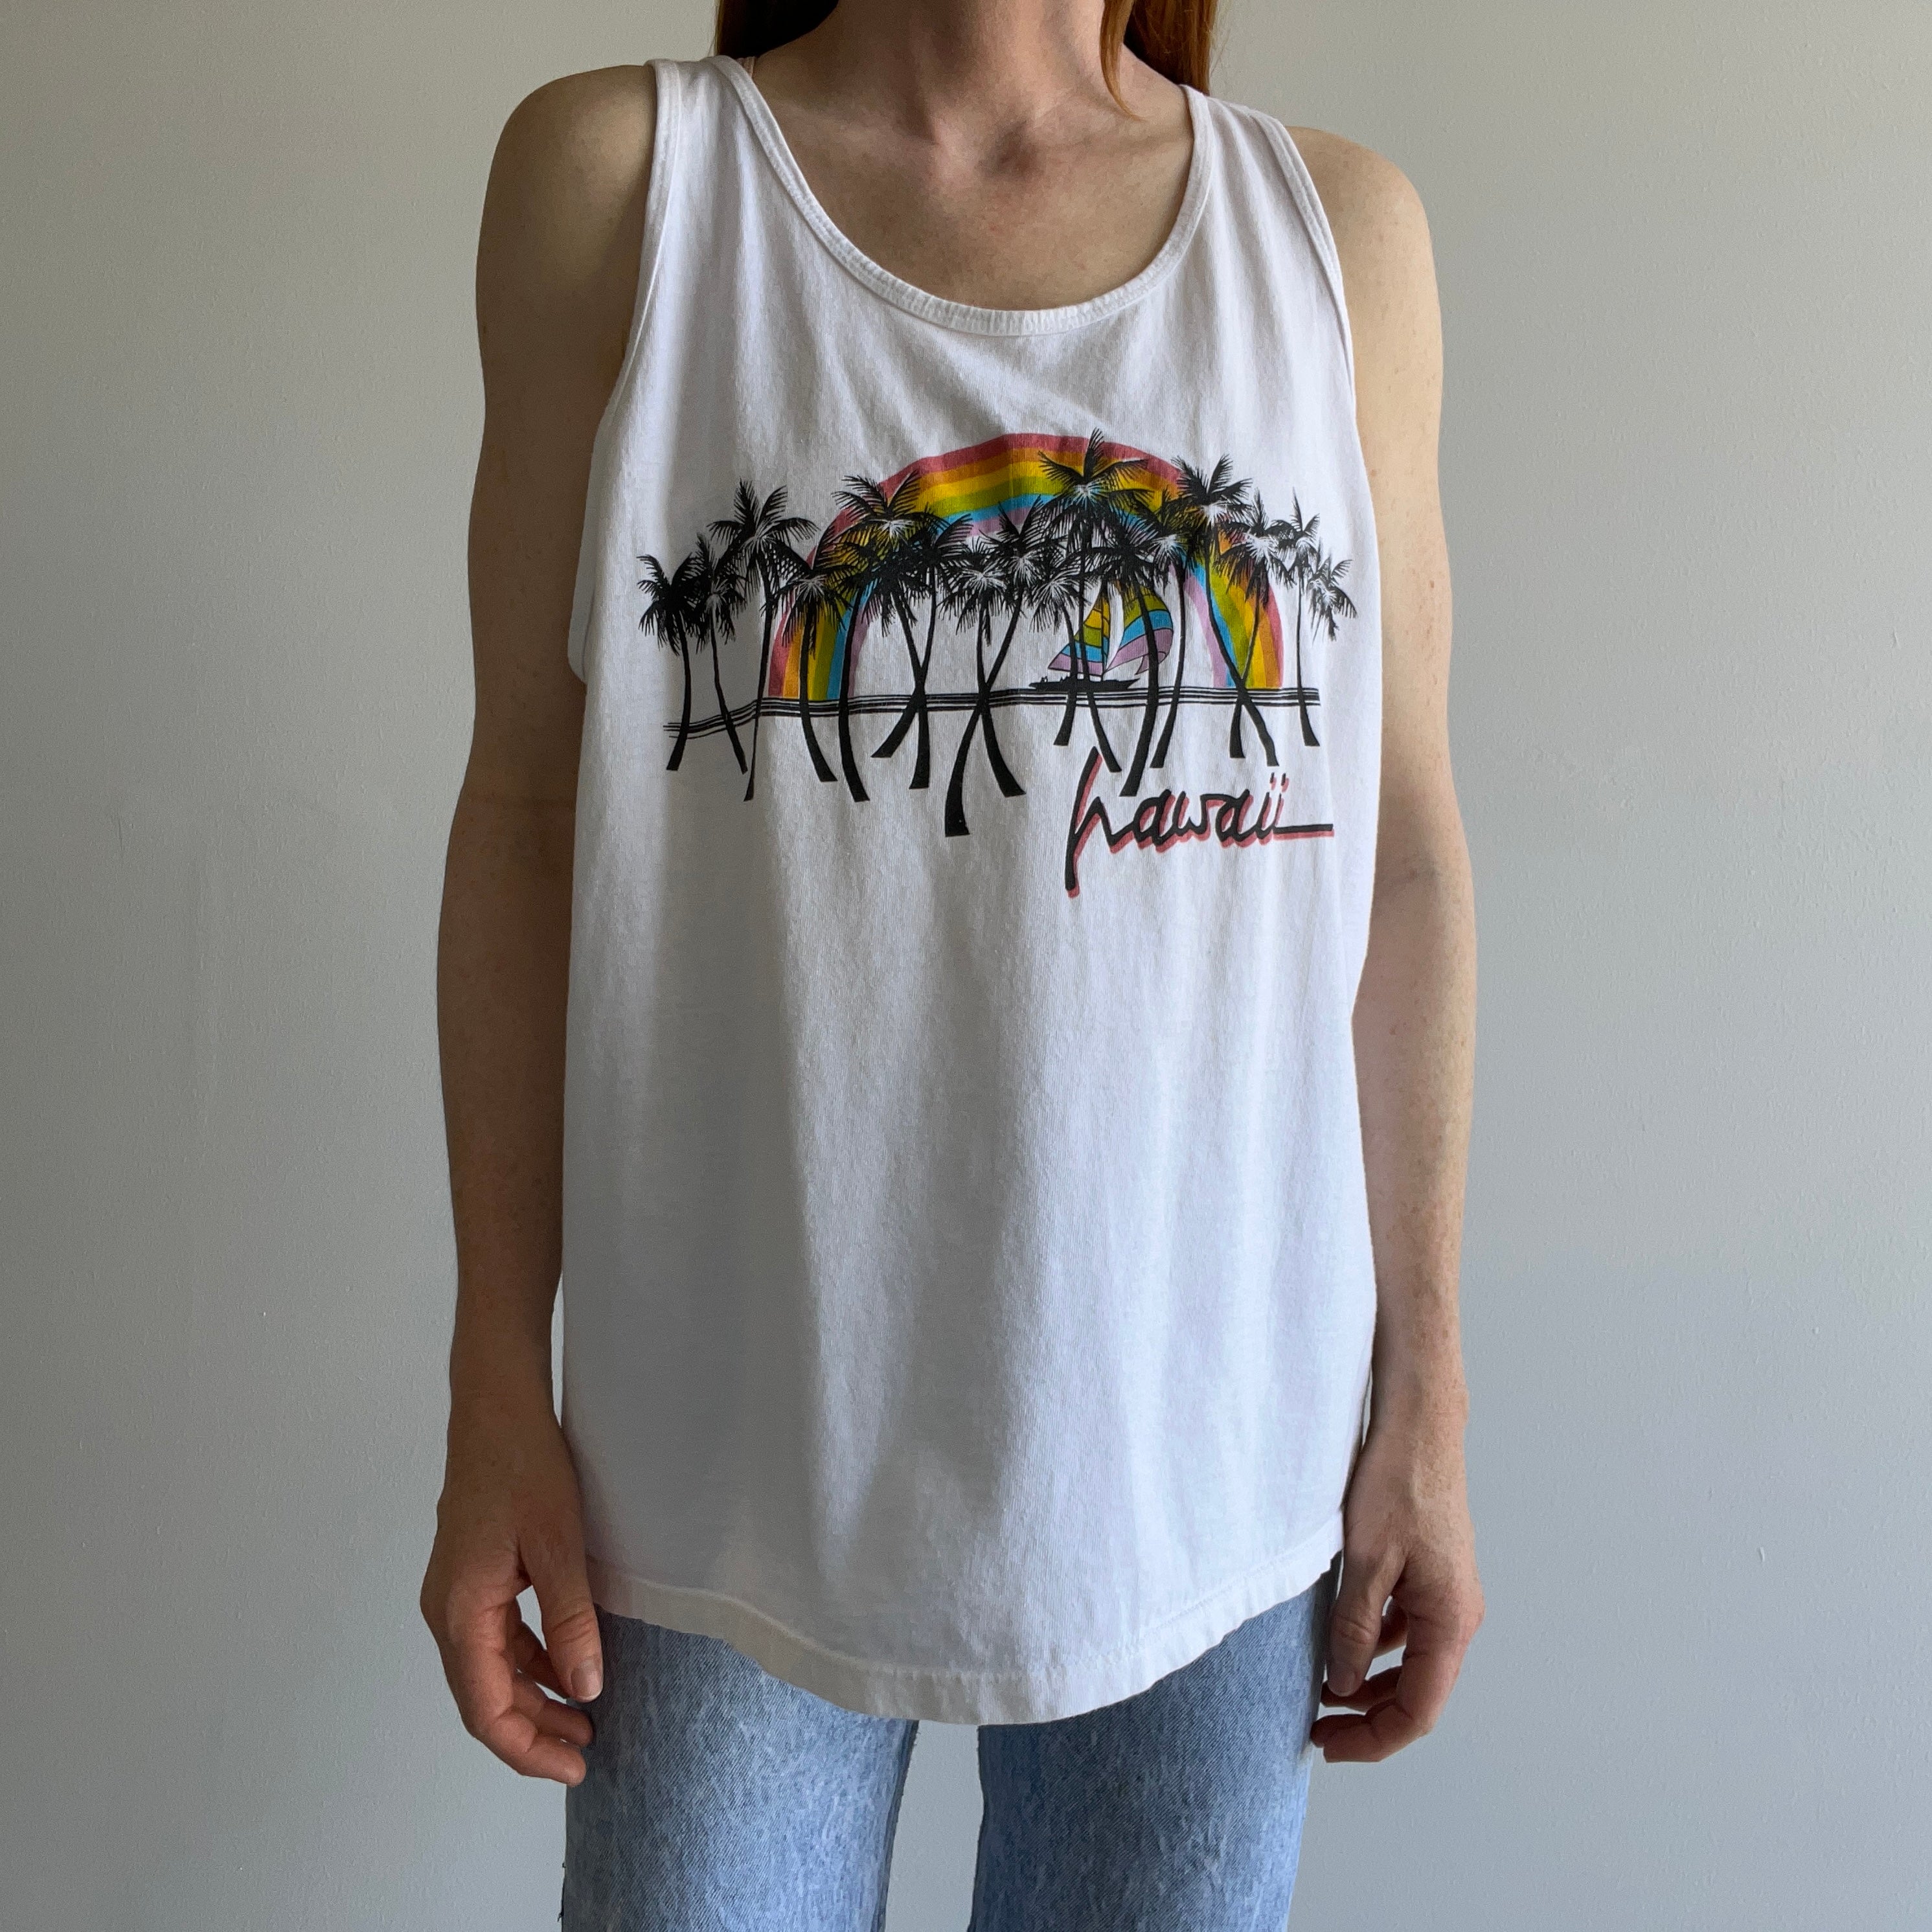 1980s Hawaii Tank Top by Stedman - YES!